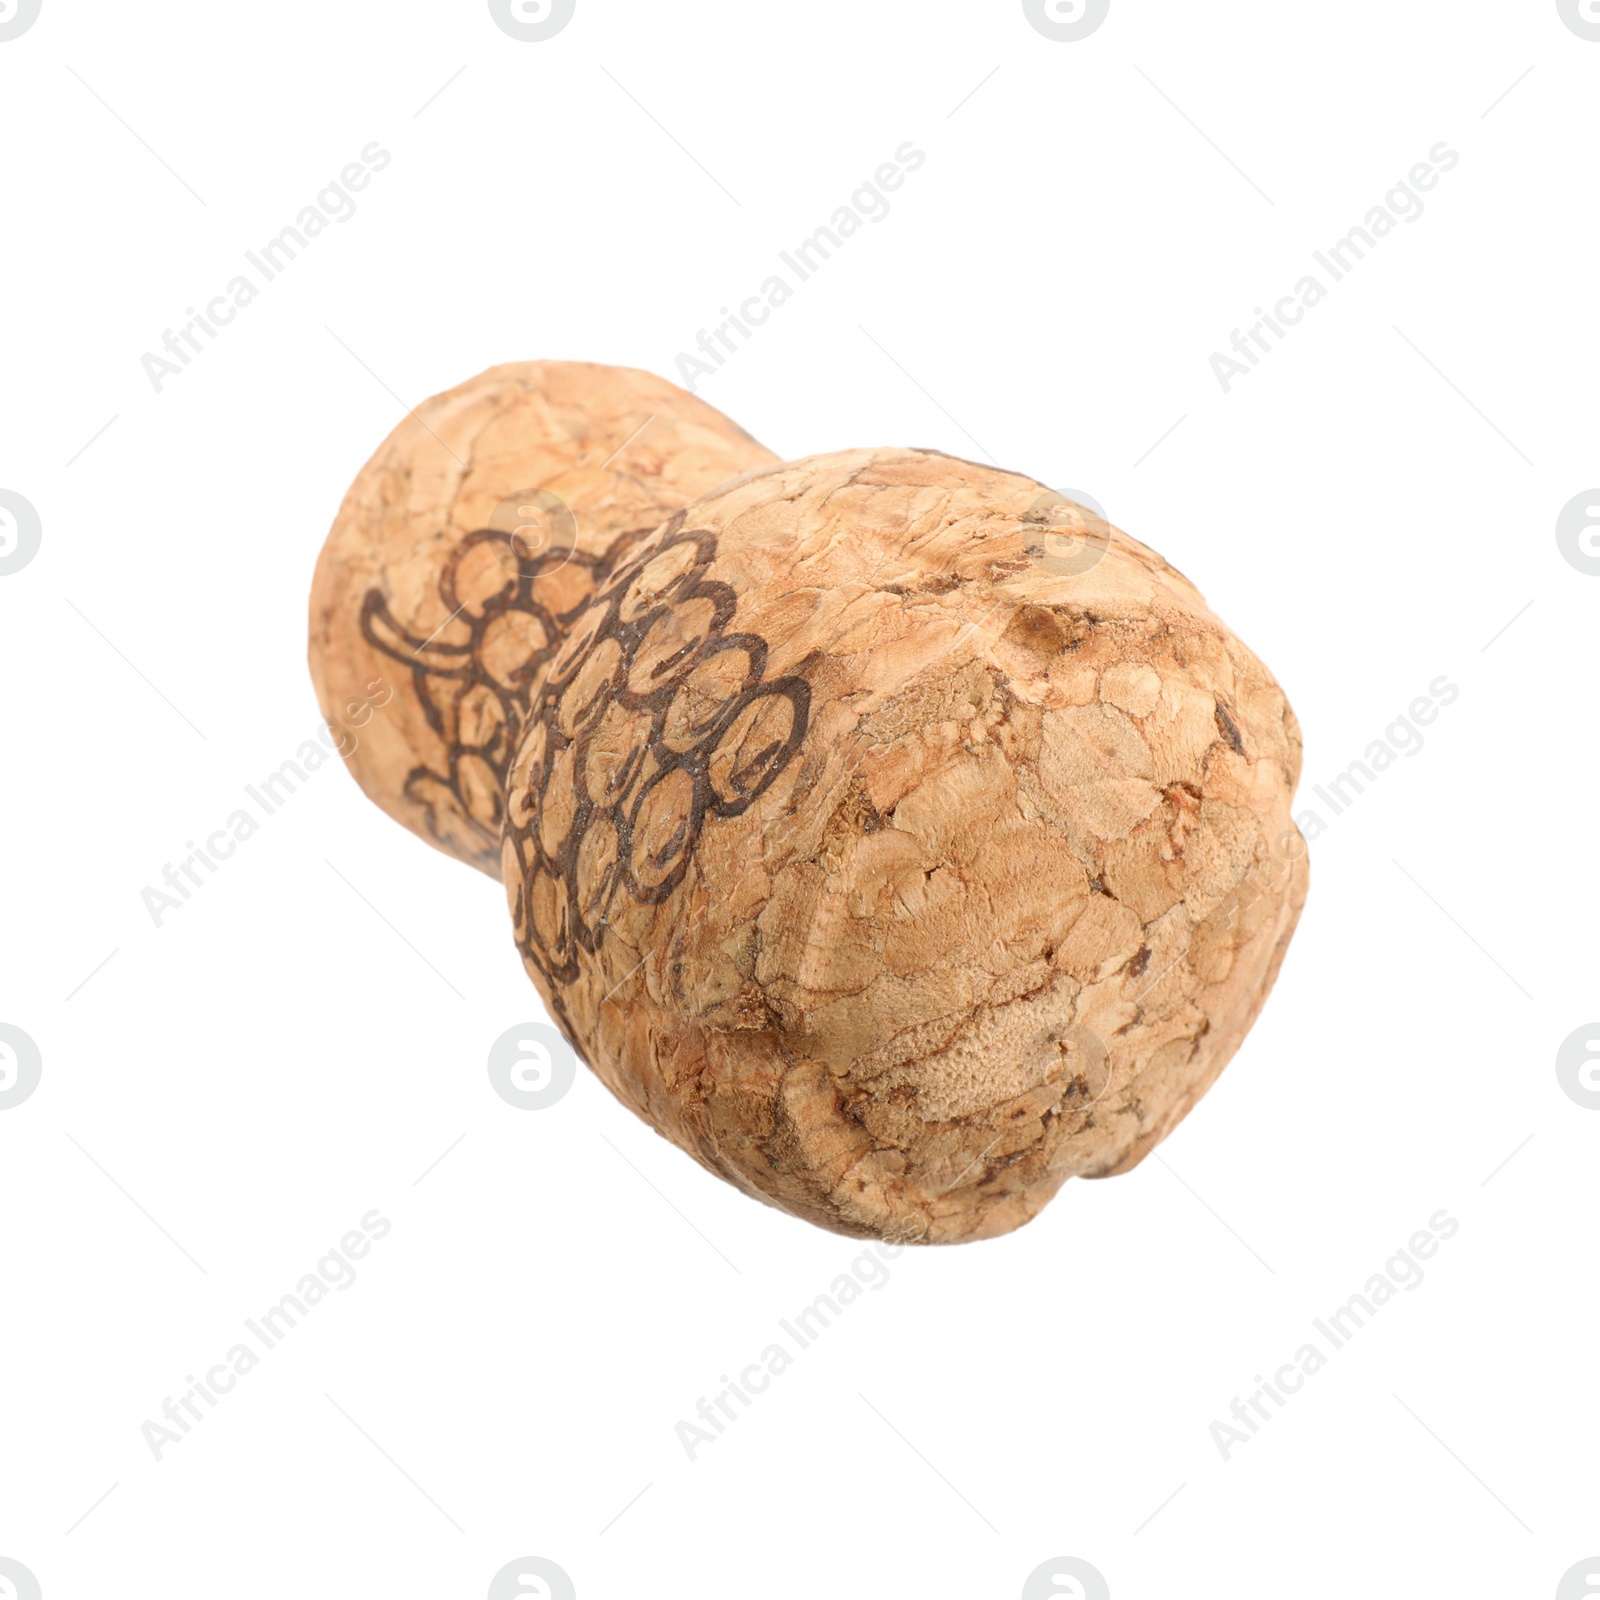 Photo of Sparkling wine cork with grape image isolated on white